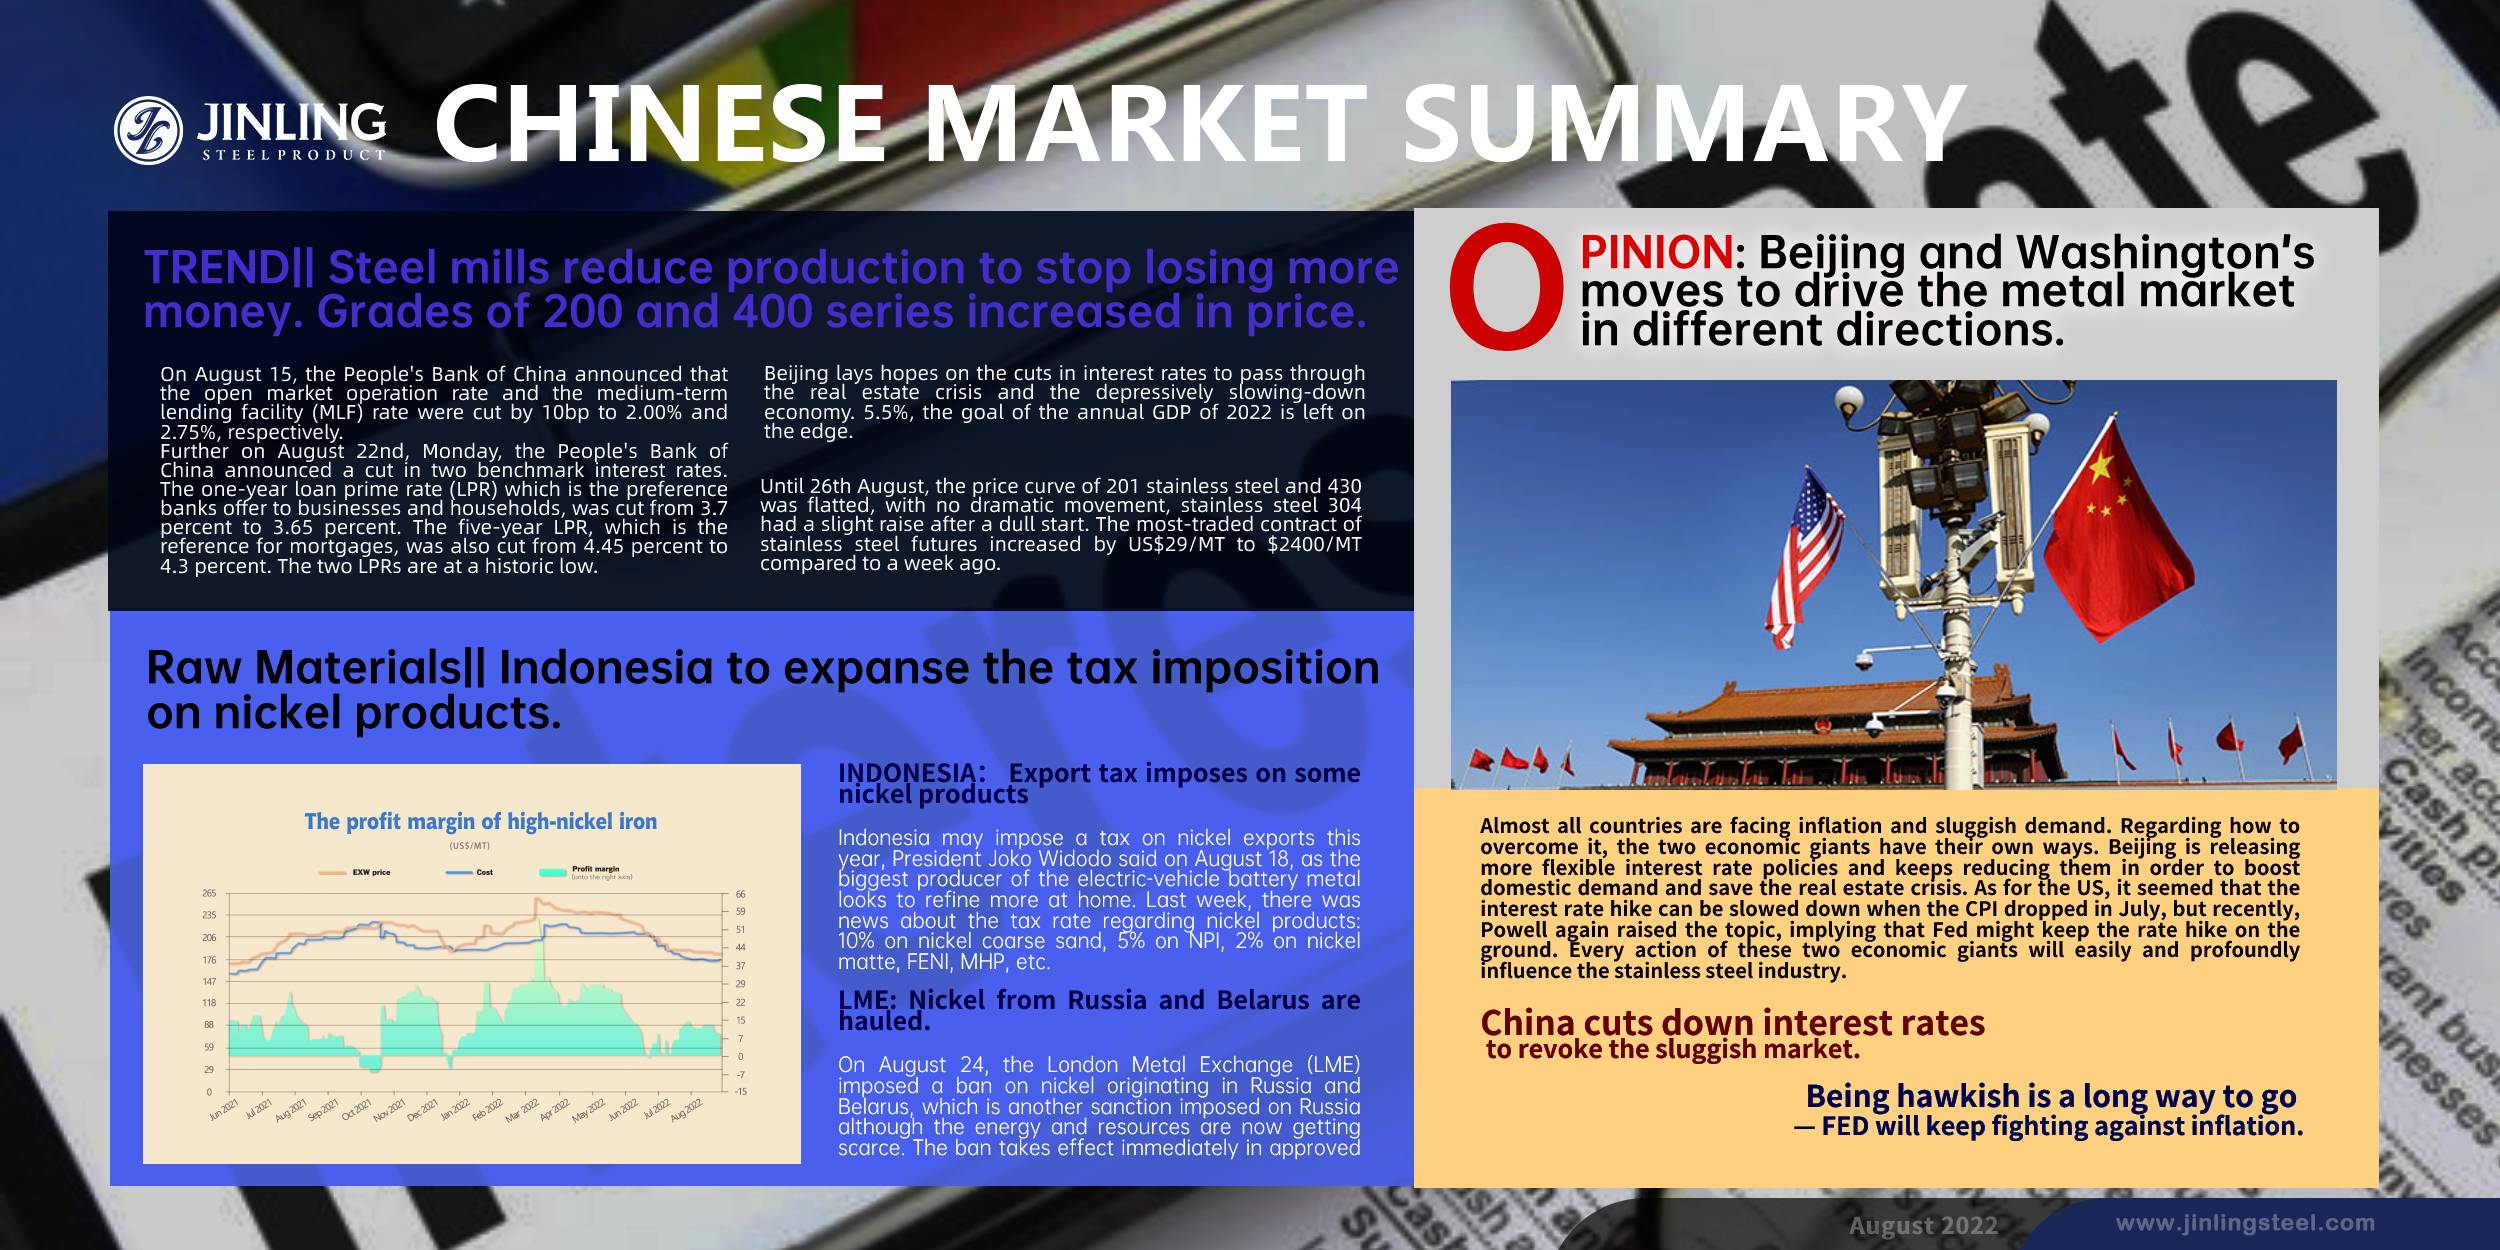 Stainless Steel Market Summary in China ||  Beijing and Washington’s moves drive the metal market in different directions. (22 Aug ~ 26 Aug)